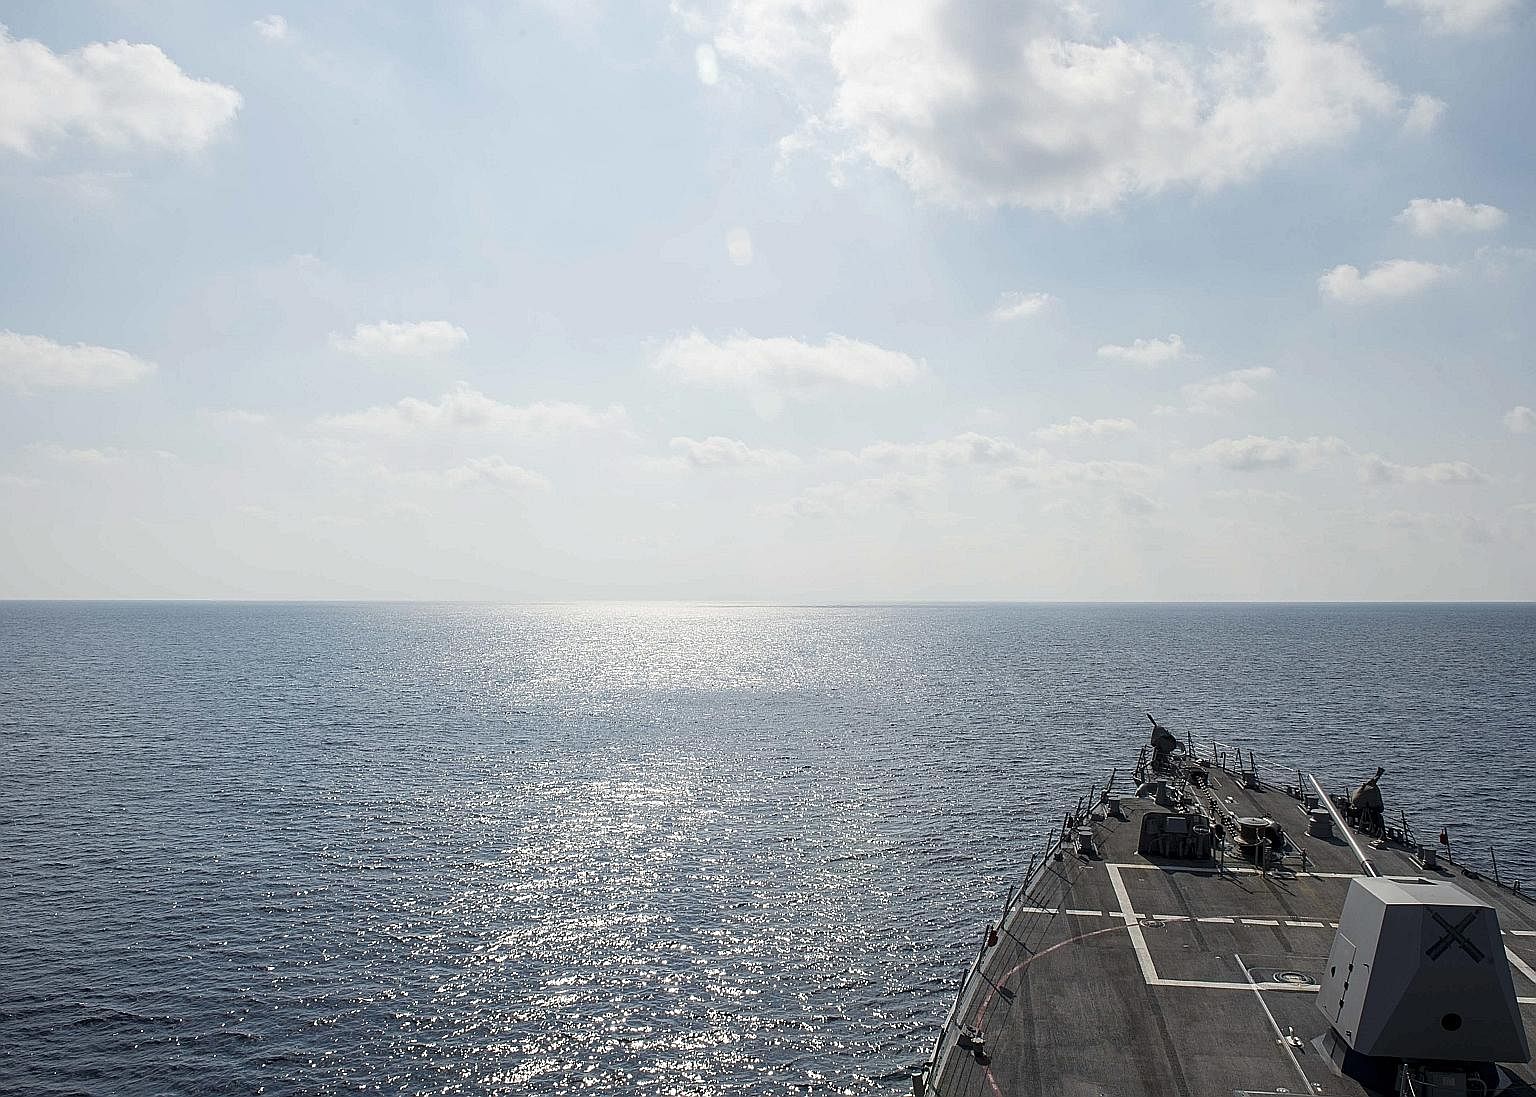 The guided-missile destroyer USS William P. Lawrence conducting a routine patrol in international waters in the South China Sea on May 2. On May 10, the US vessel was reported to have conducted a "routine freedom of navigation operation" sailing near